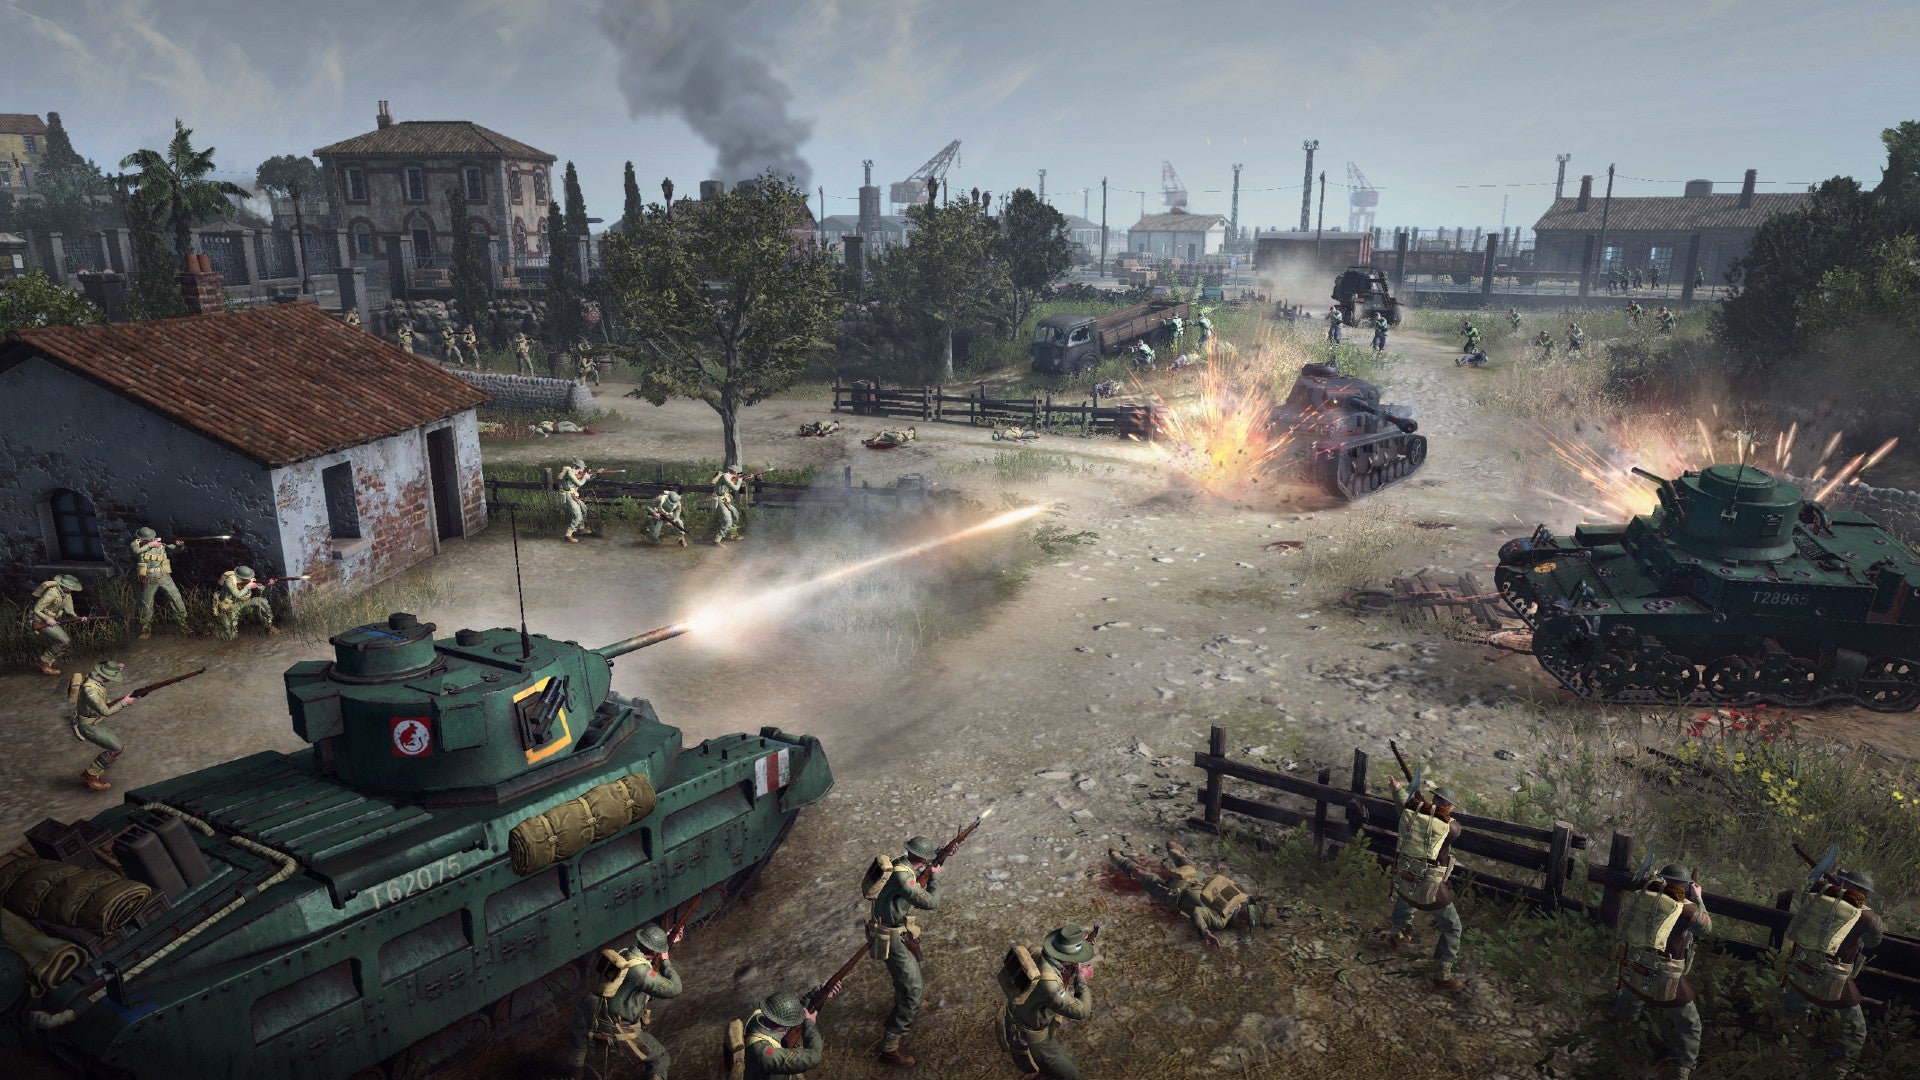 Company of Heroes 3 art showing tanks firing at each other while soldiers take cover and aim rifles.